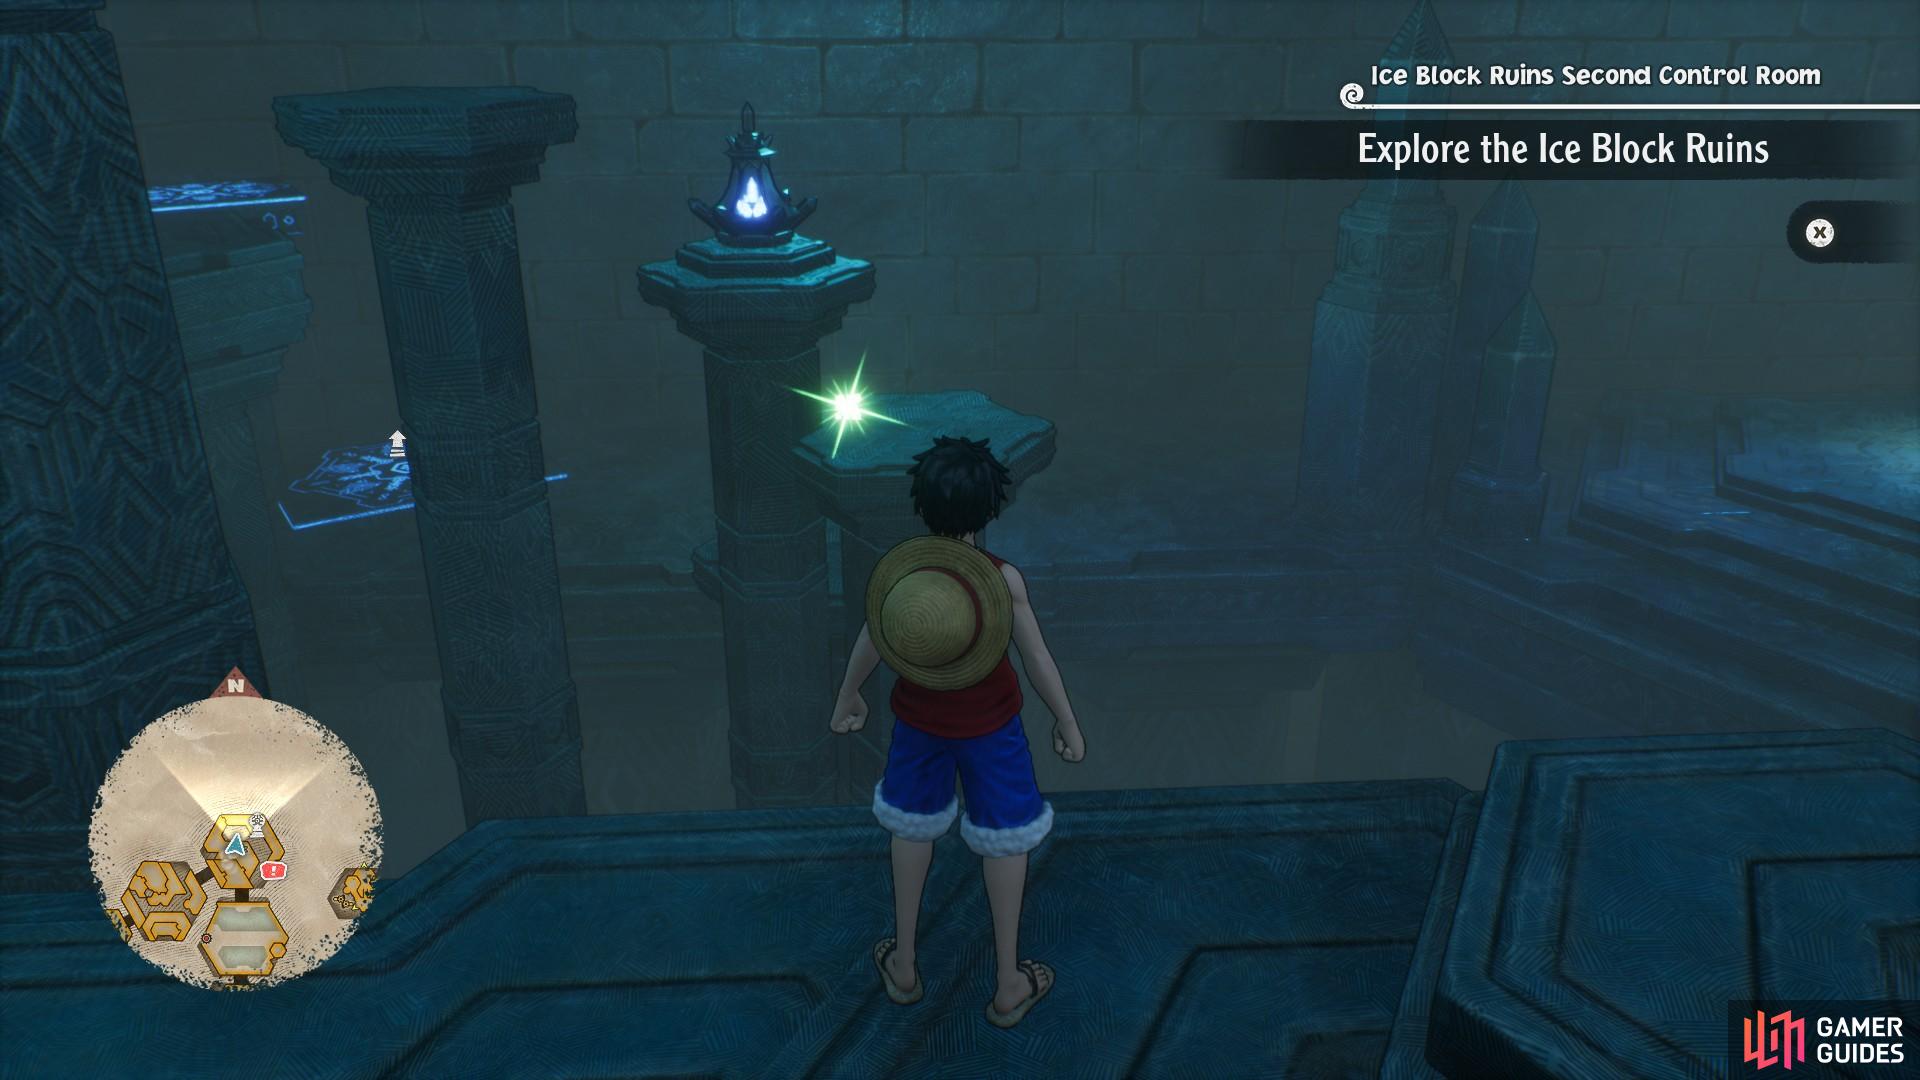 Easily found on the stone pillar in this room.